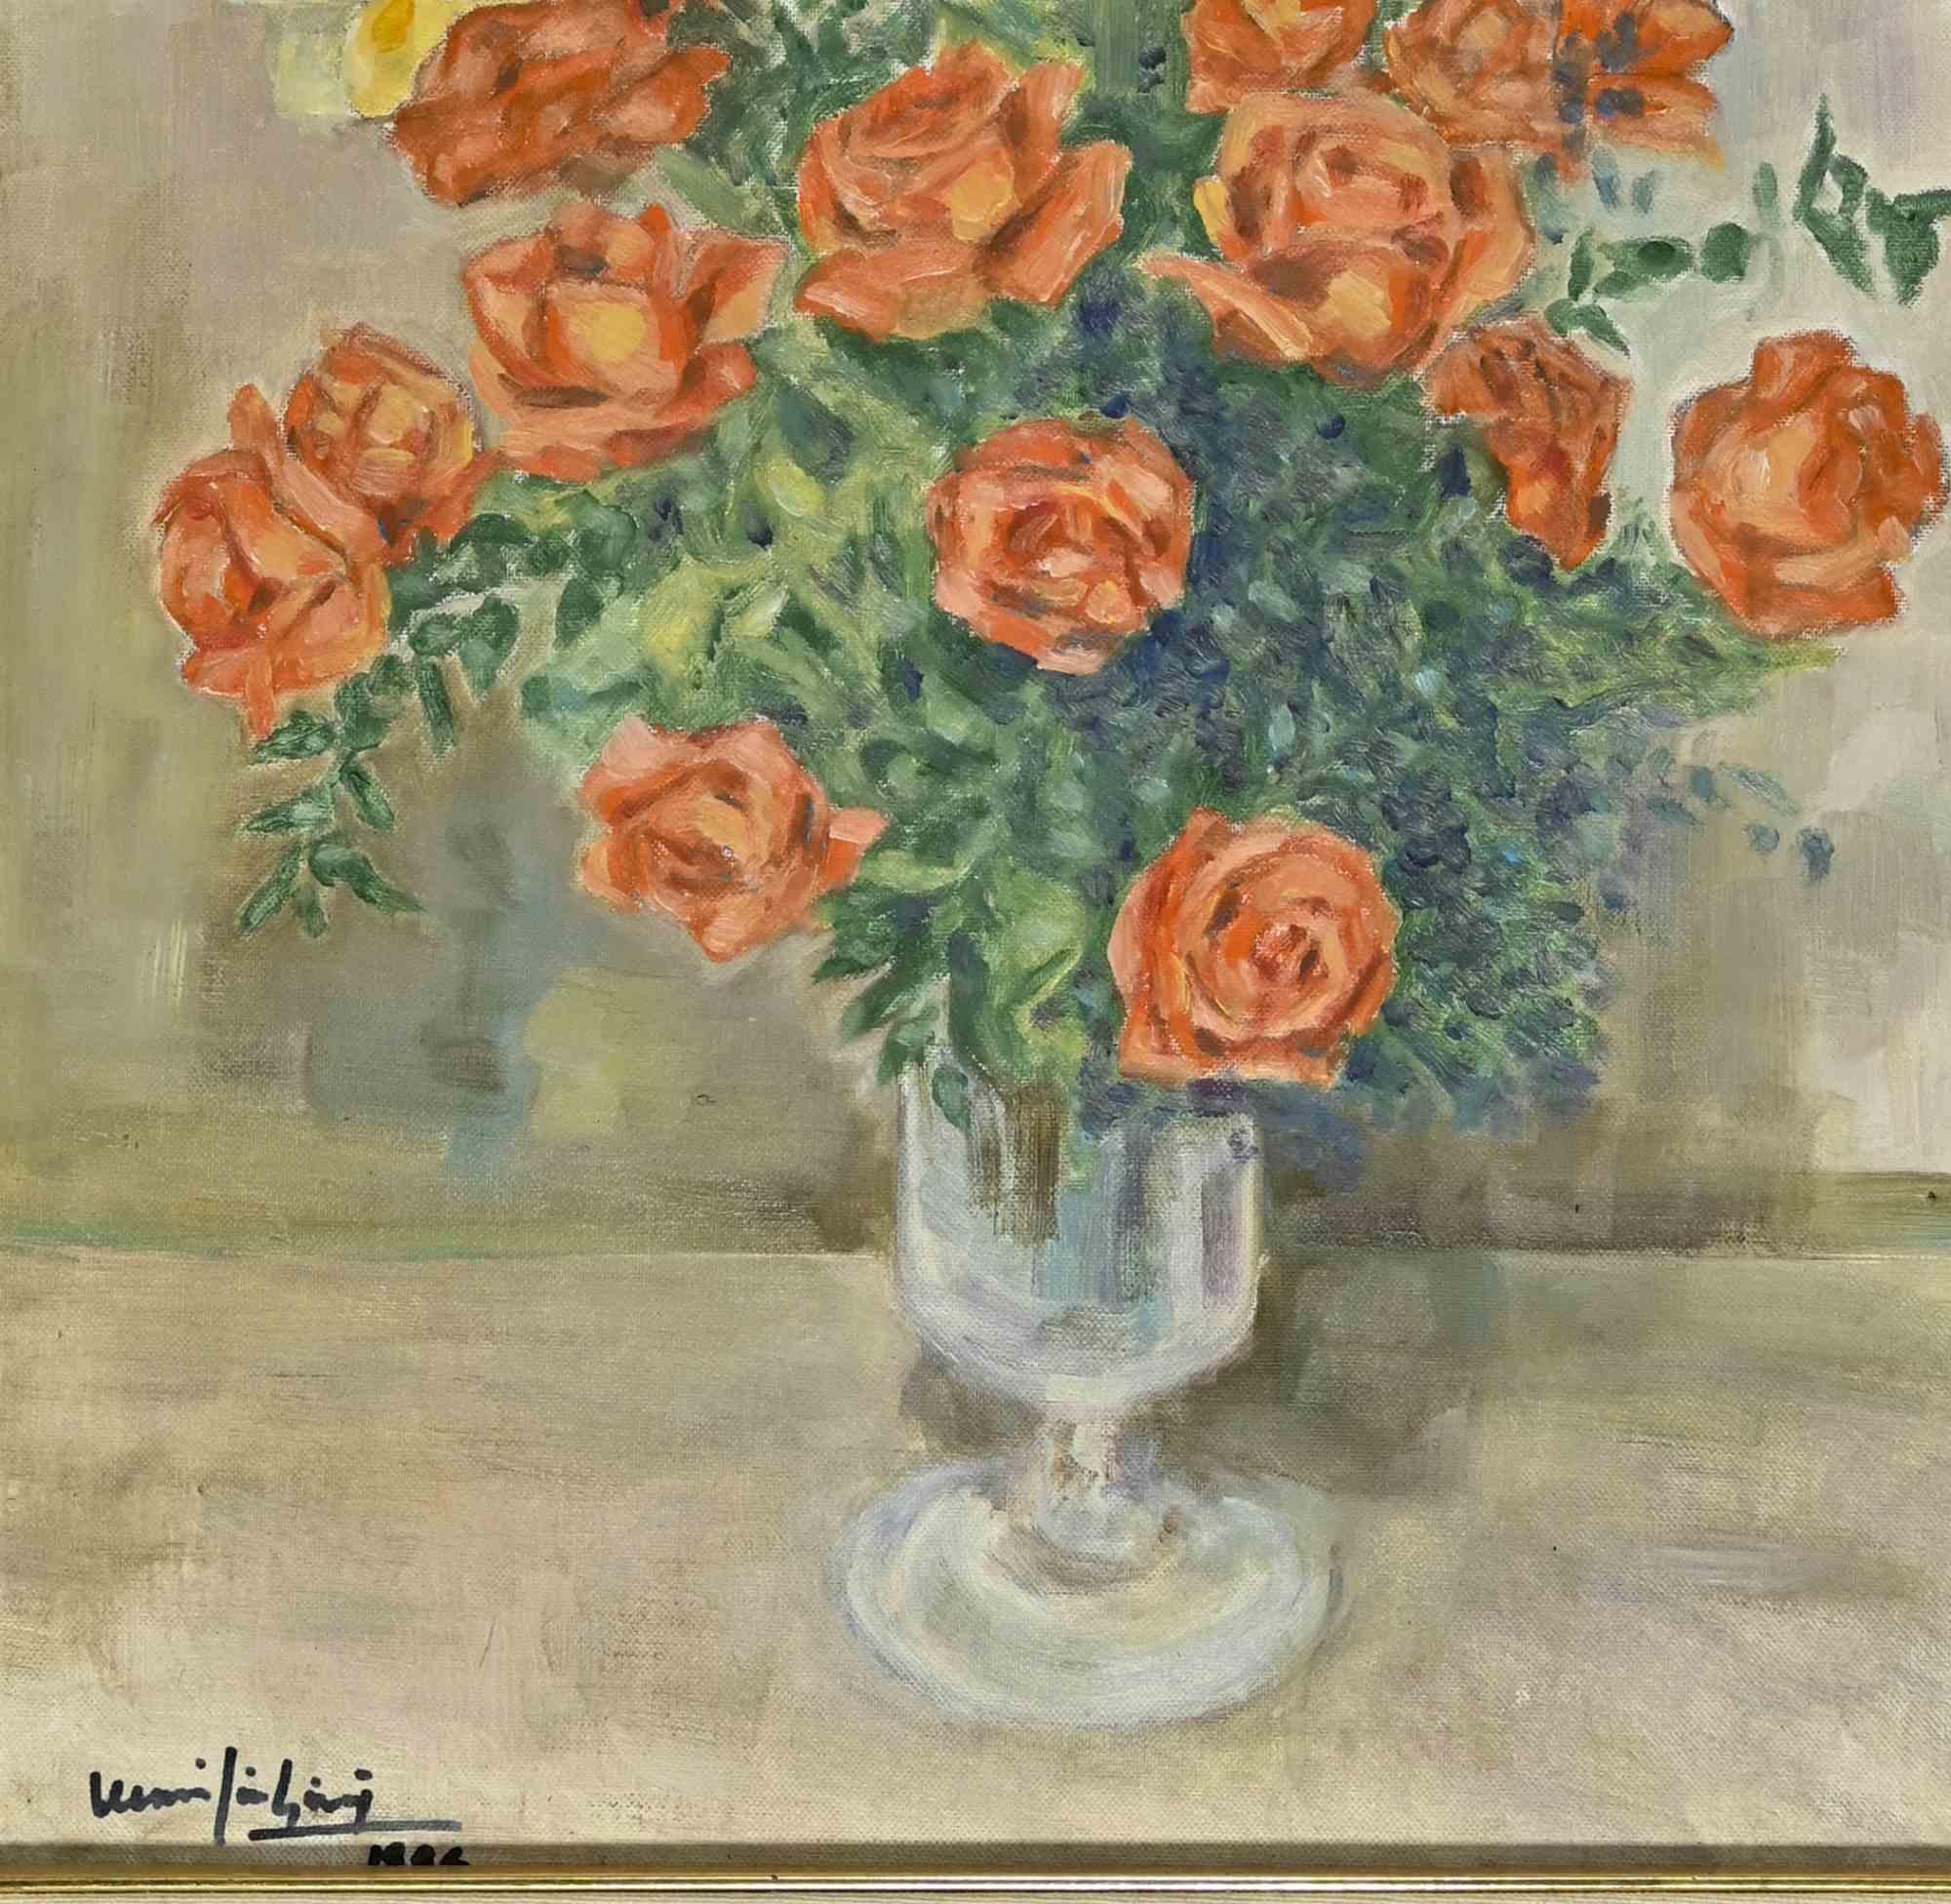 Flower vase  is an artwork realized by an italian artist in the late 20th Century.  

Oil painting, 70 x 58 cm; with frame. 

Handsigned lower side.

Good conditions